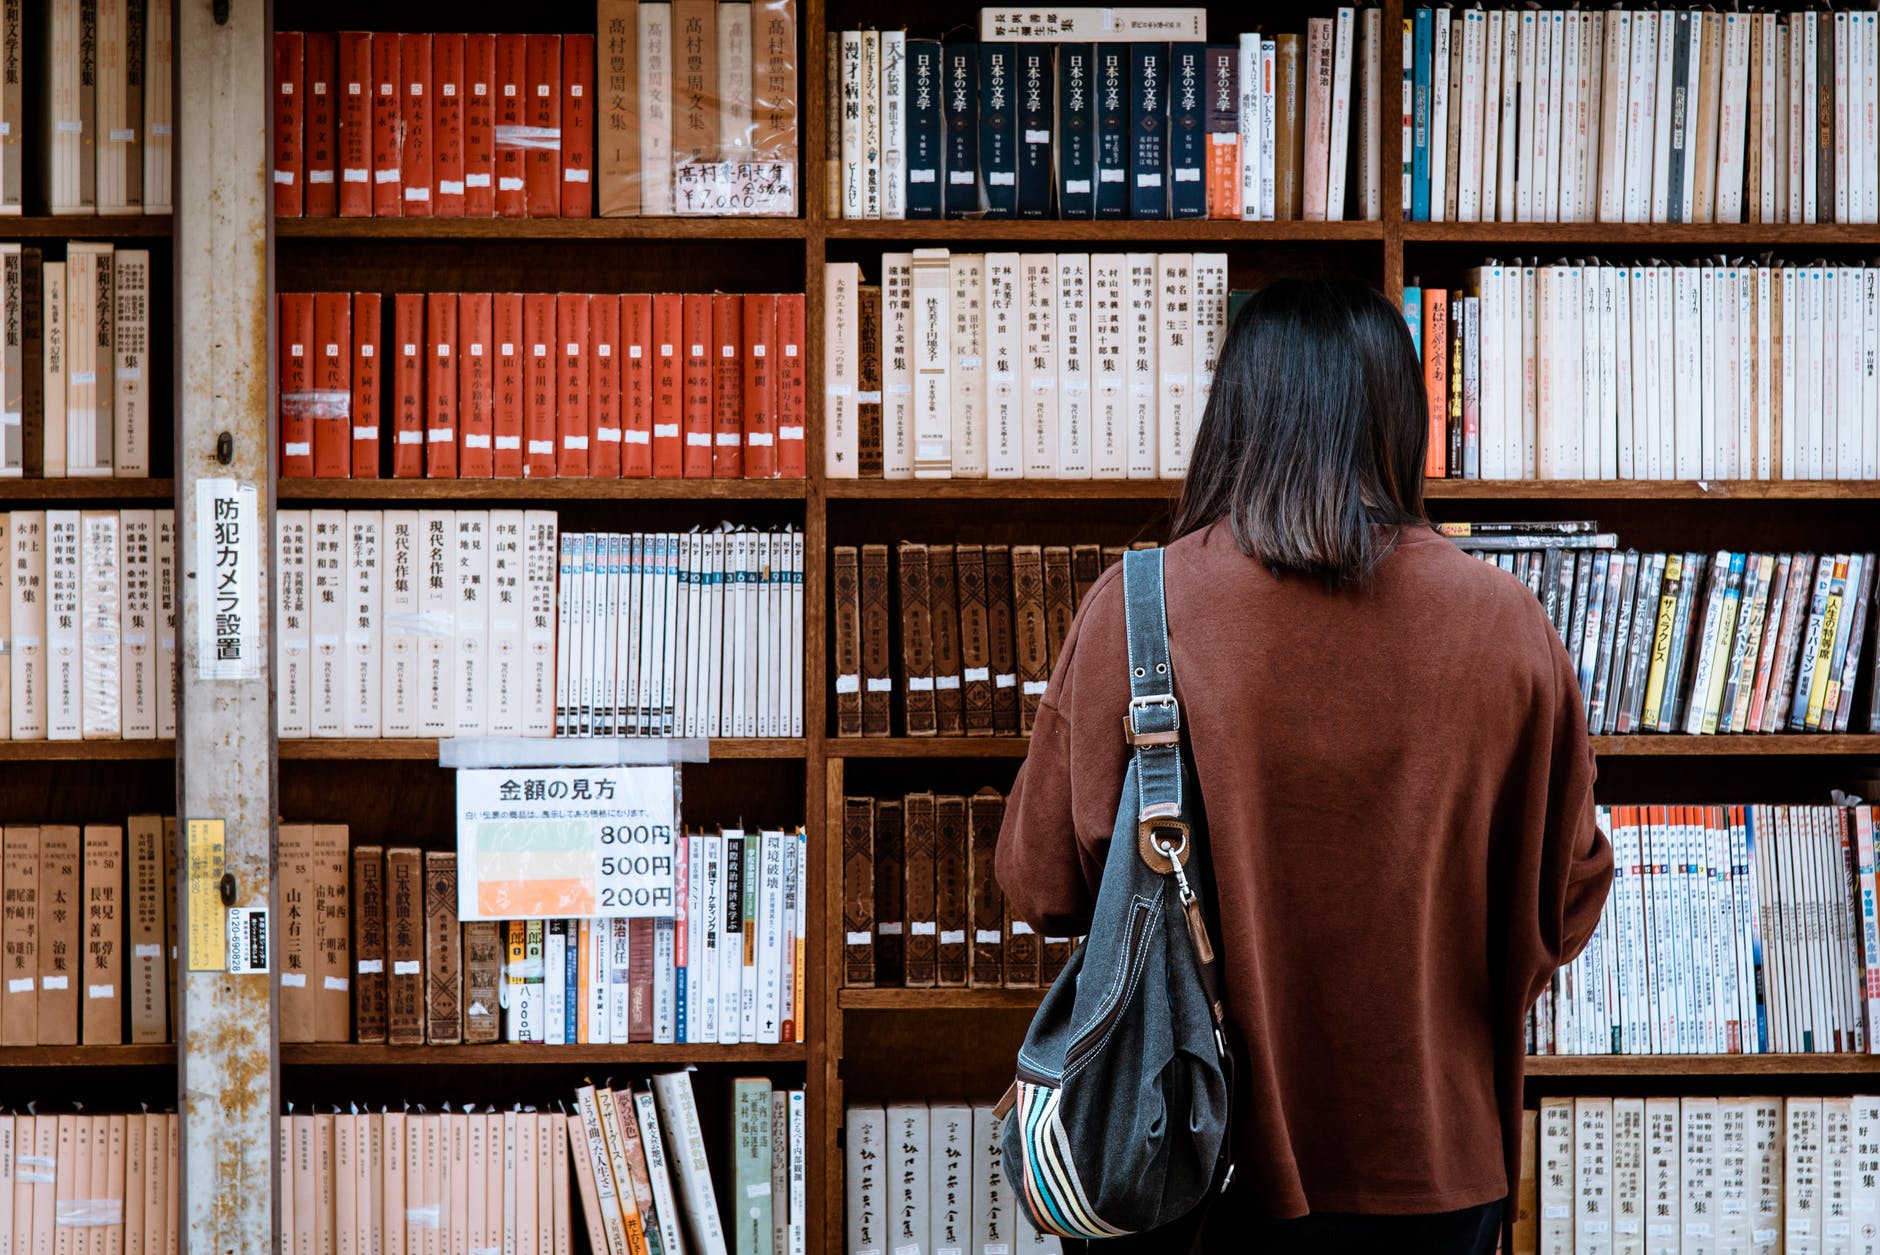 woman wearing brown shirt carrying black leather bag on front of library books
travel as a student